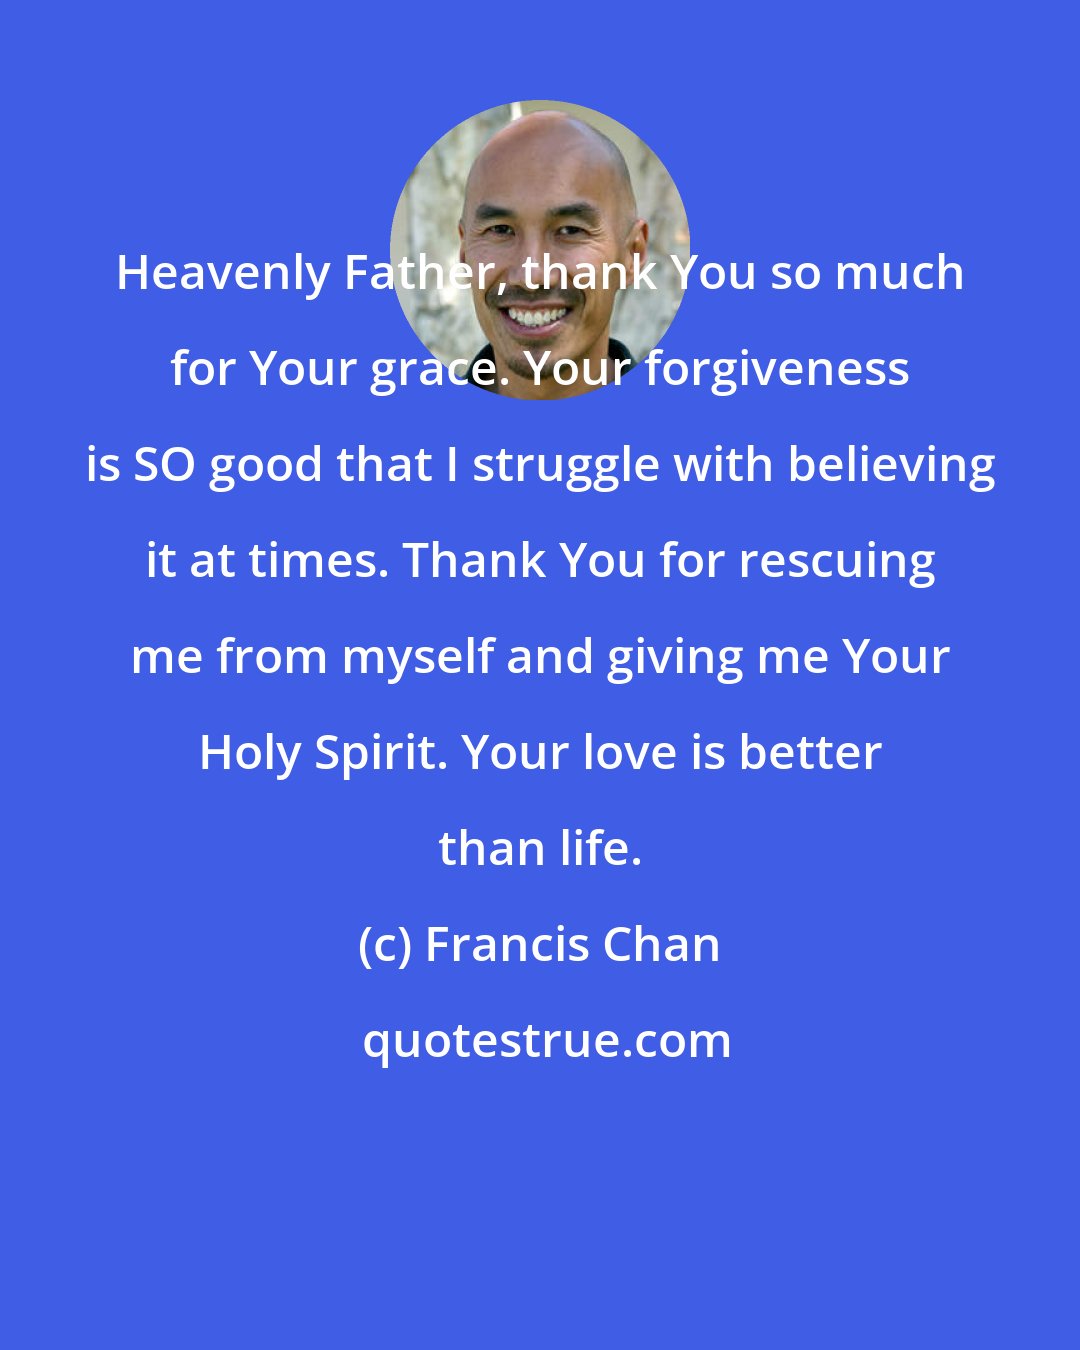 Francis Chan: Heavenly Father, thank You so much for Your grace. Your forgiveness is SO good that I struggle with believing it at times. Thank You for rescuing me from myself and giving me Your Holy Spirit. Your love is better than life.